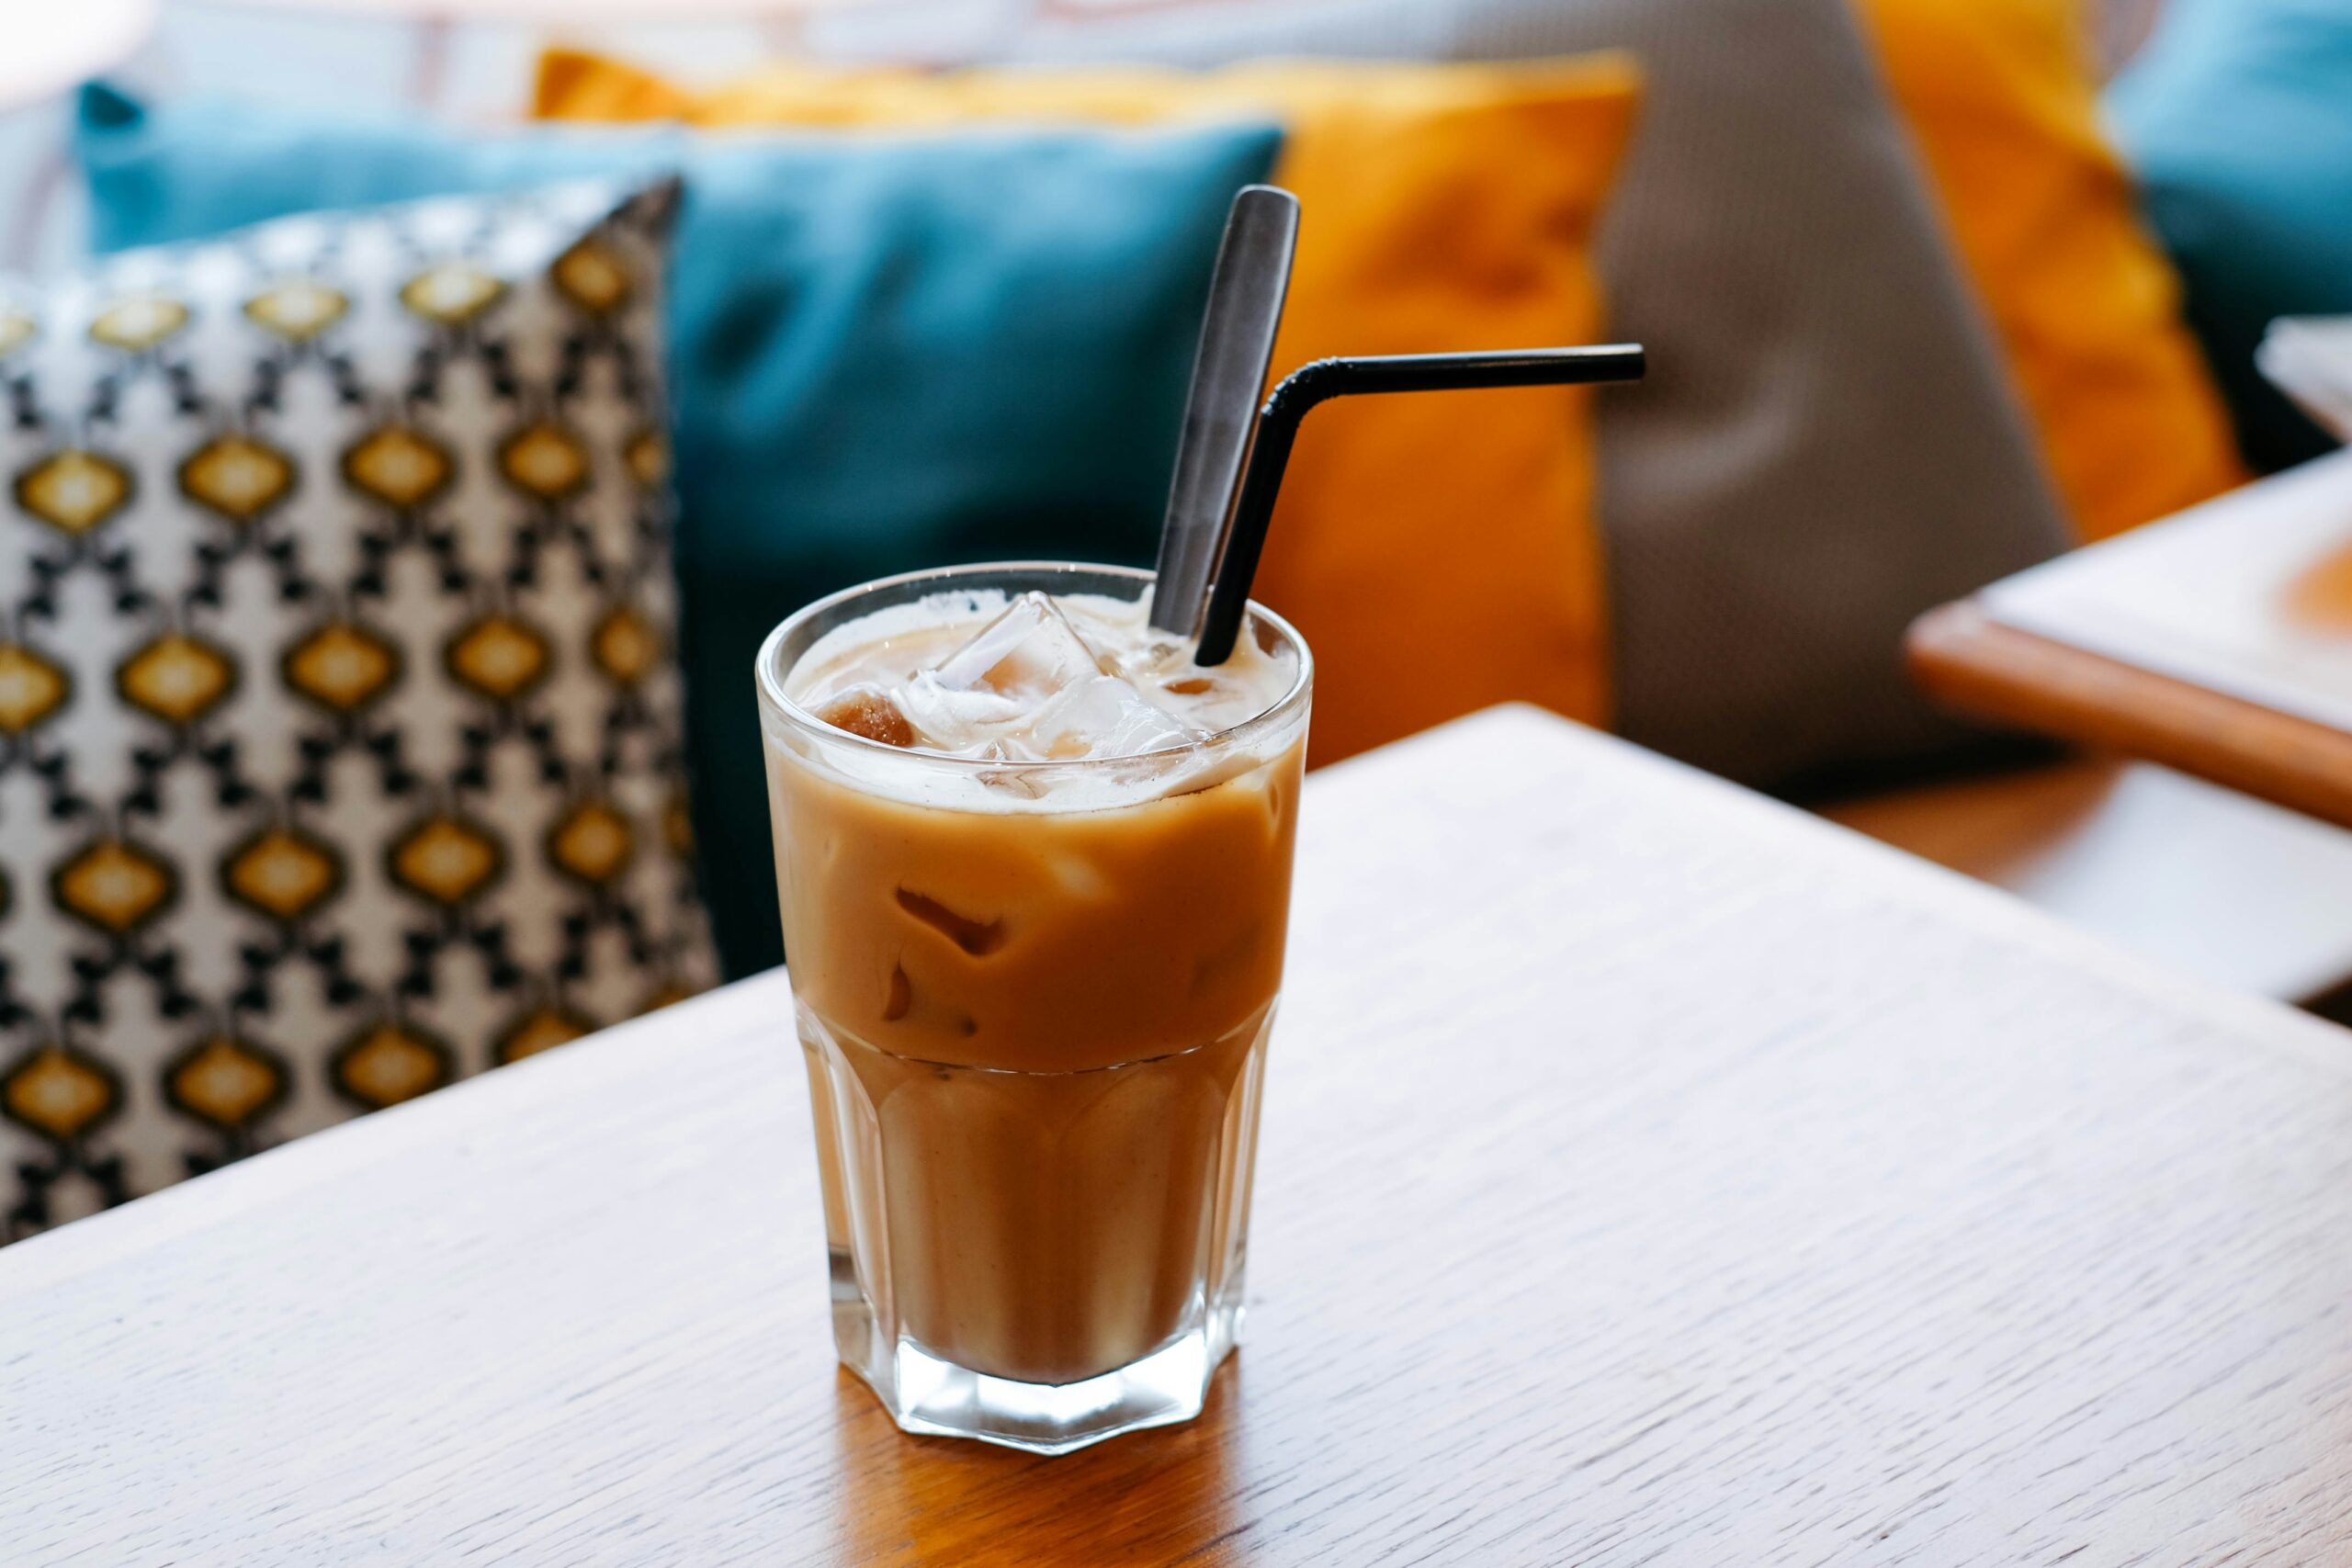 If you're looking for a simple Nespresso recipe, Iced coffee is definitely the way to go. Pictured: Iced coffee